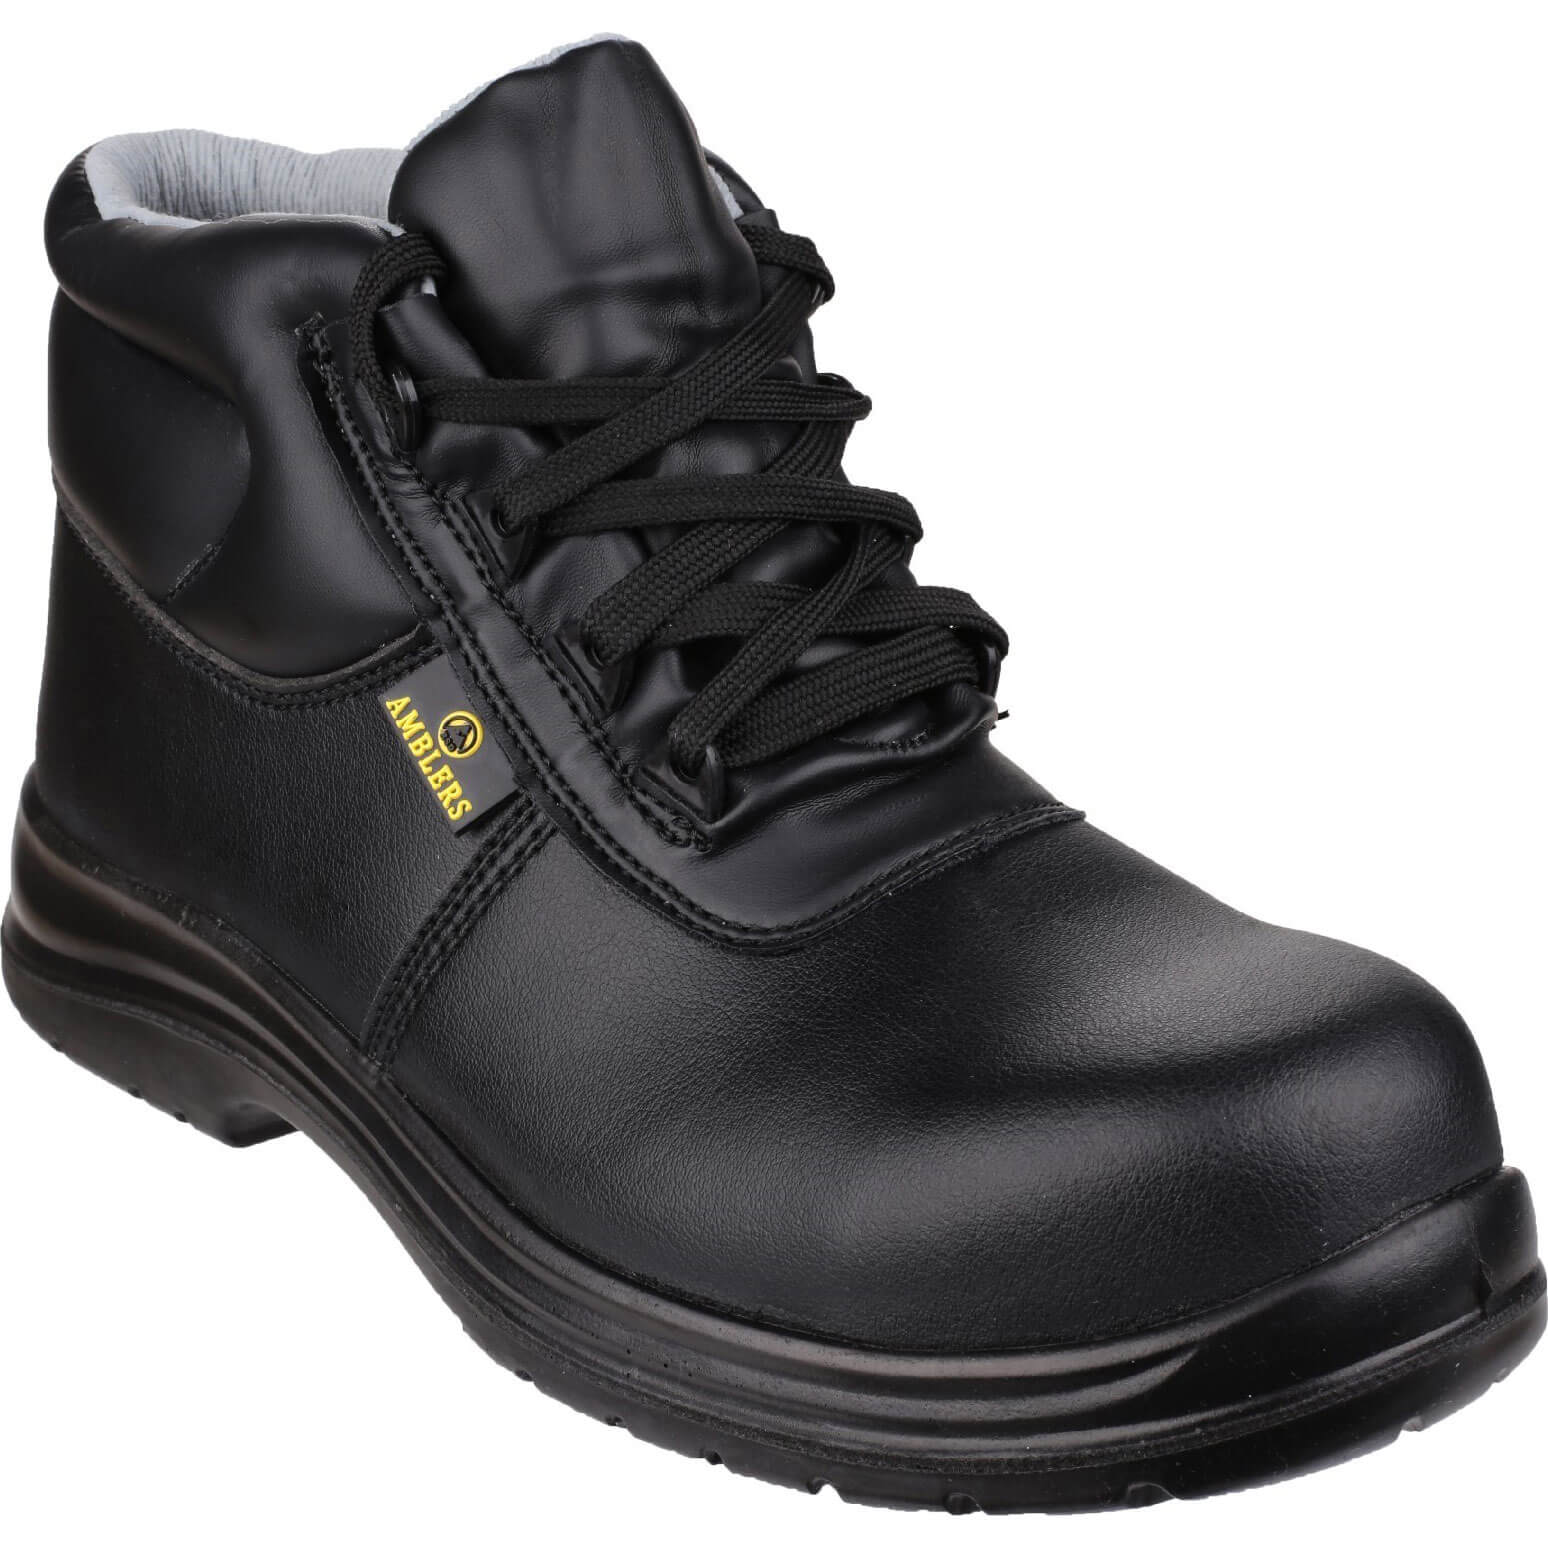 Photo of Amblers Mens Safety Fs663 Metal-free Water-resistant Safety Boots Black Size 8